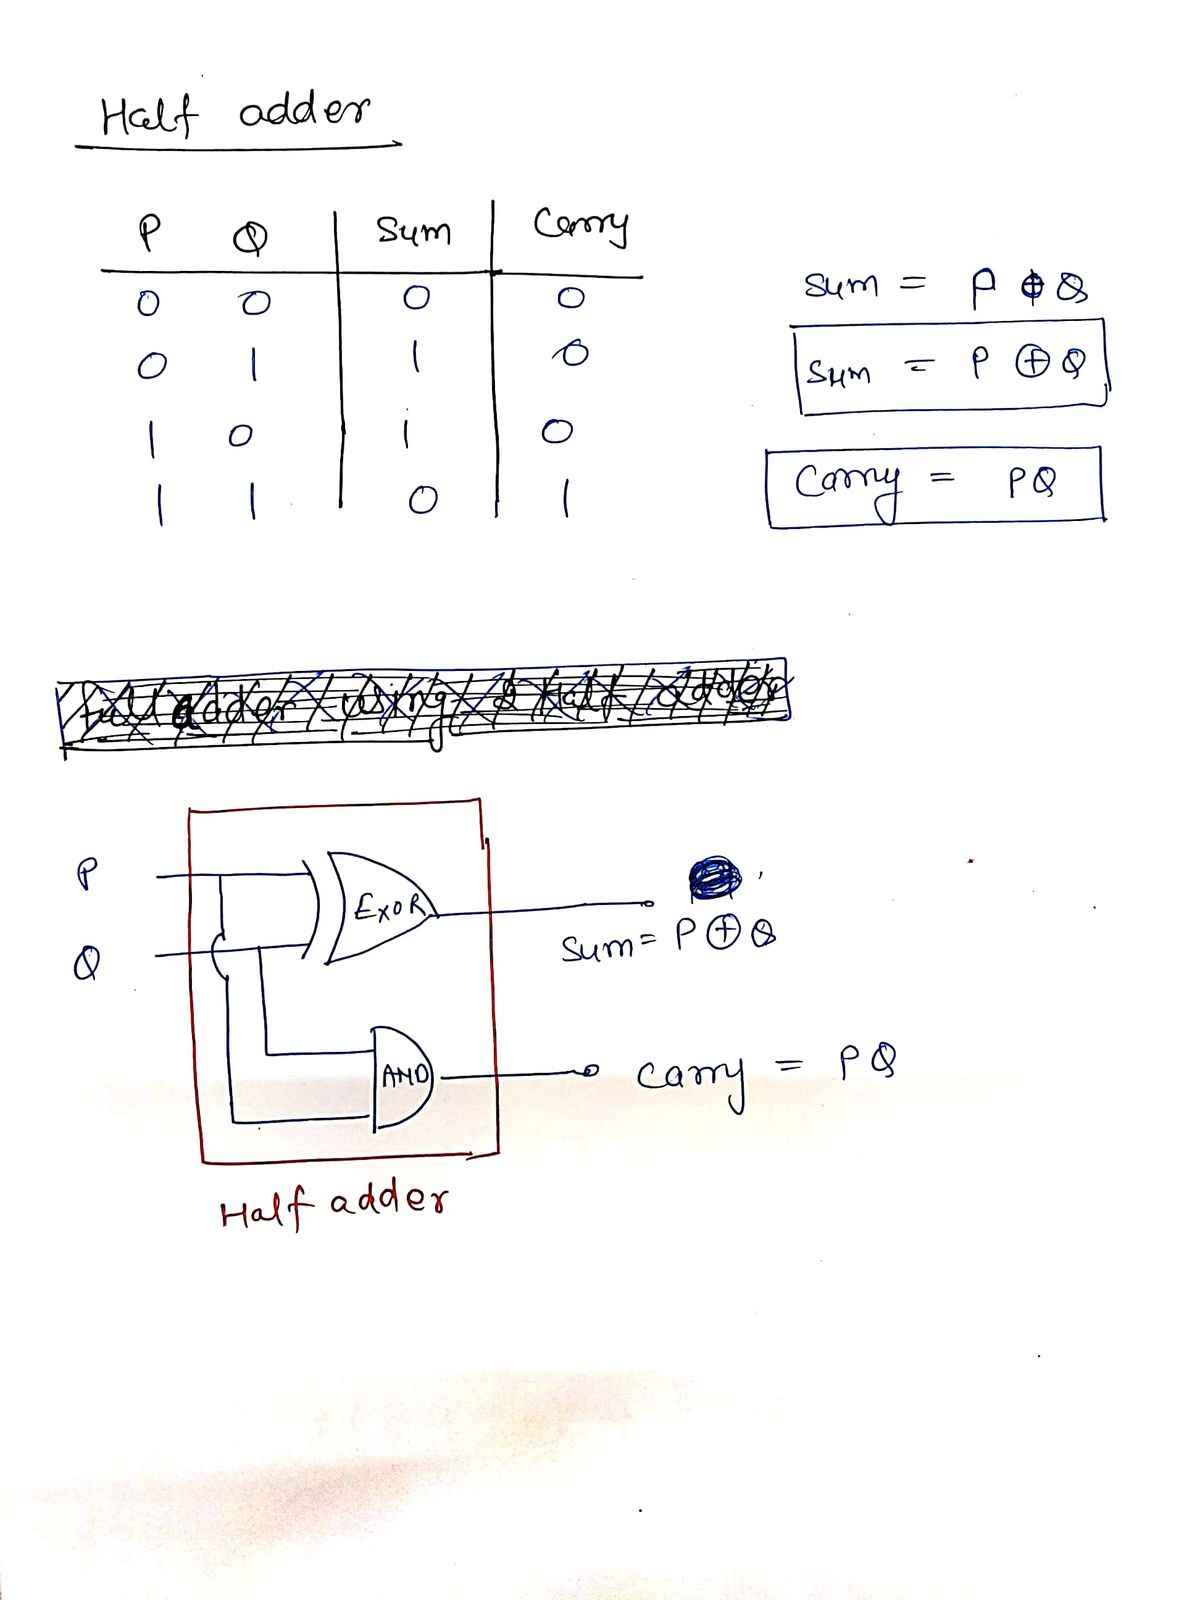 Answered: Implement the Full-adder circuit by… | bartleby